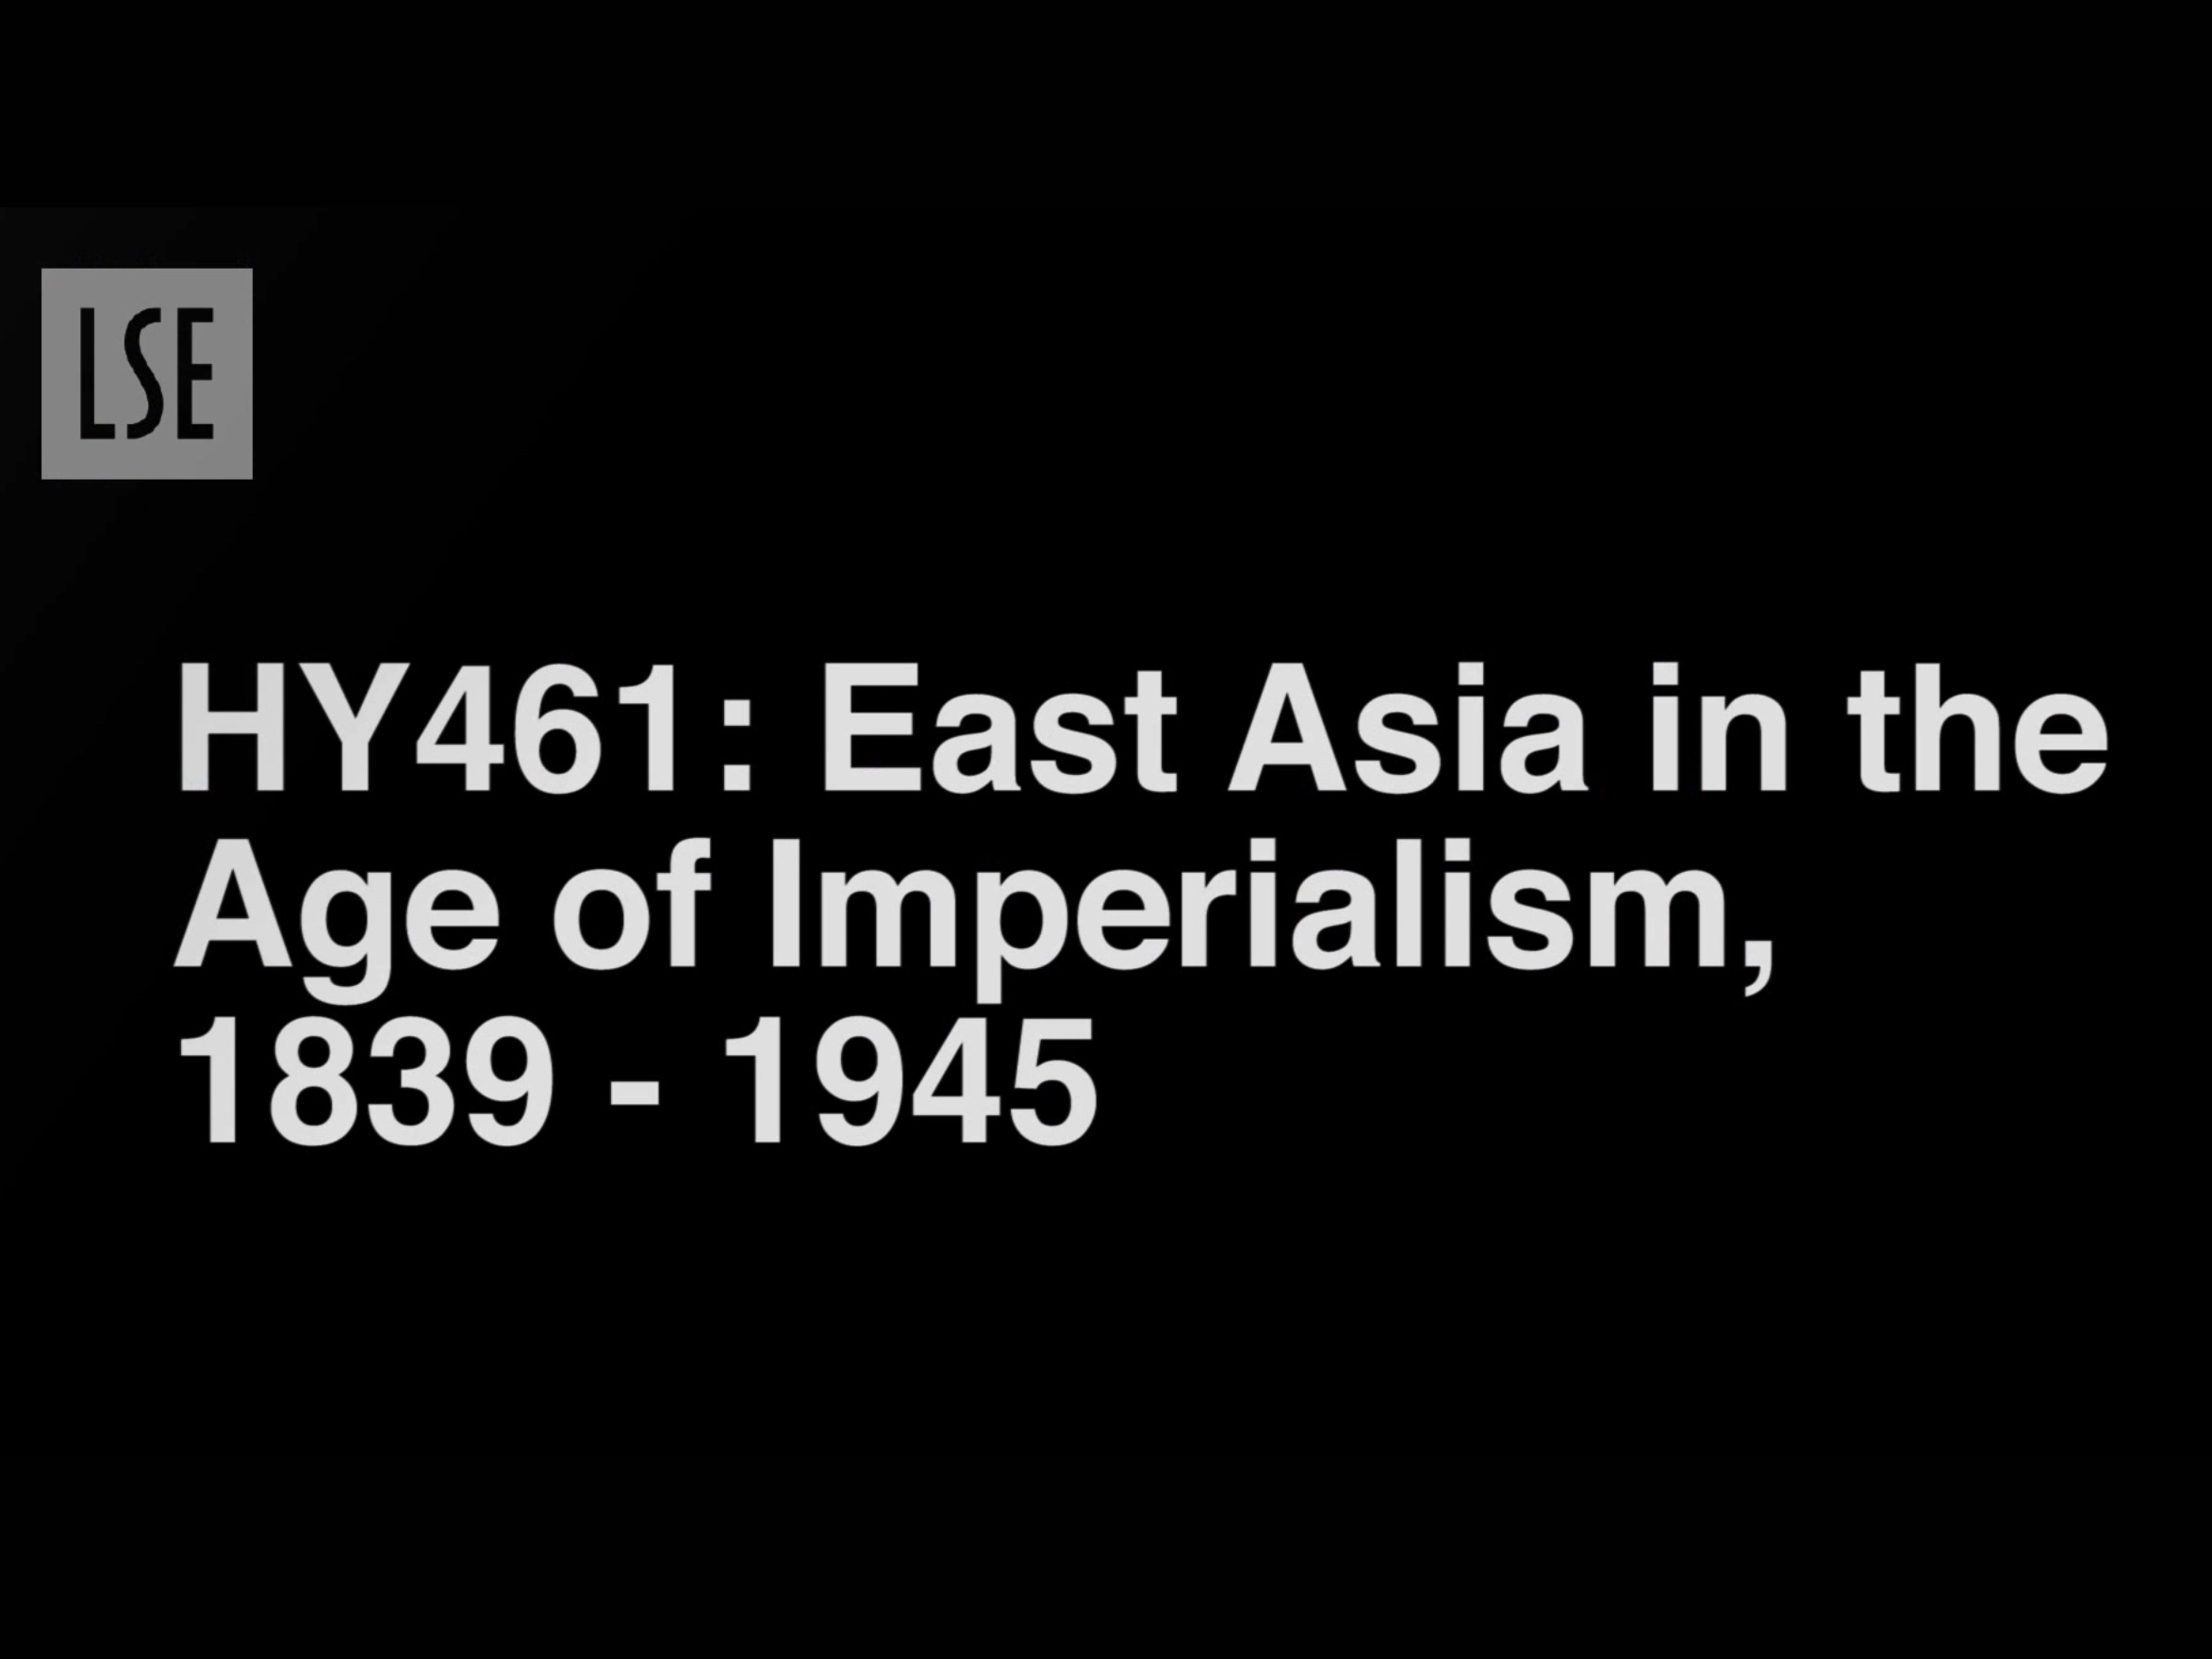 HY461: East Asia in the Age of Imperialism, 1839-1945